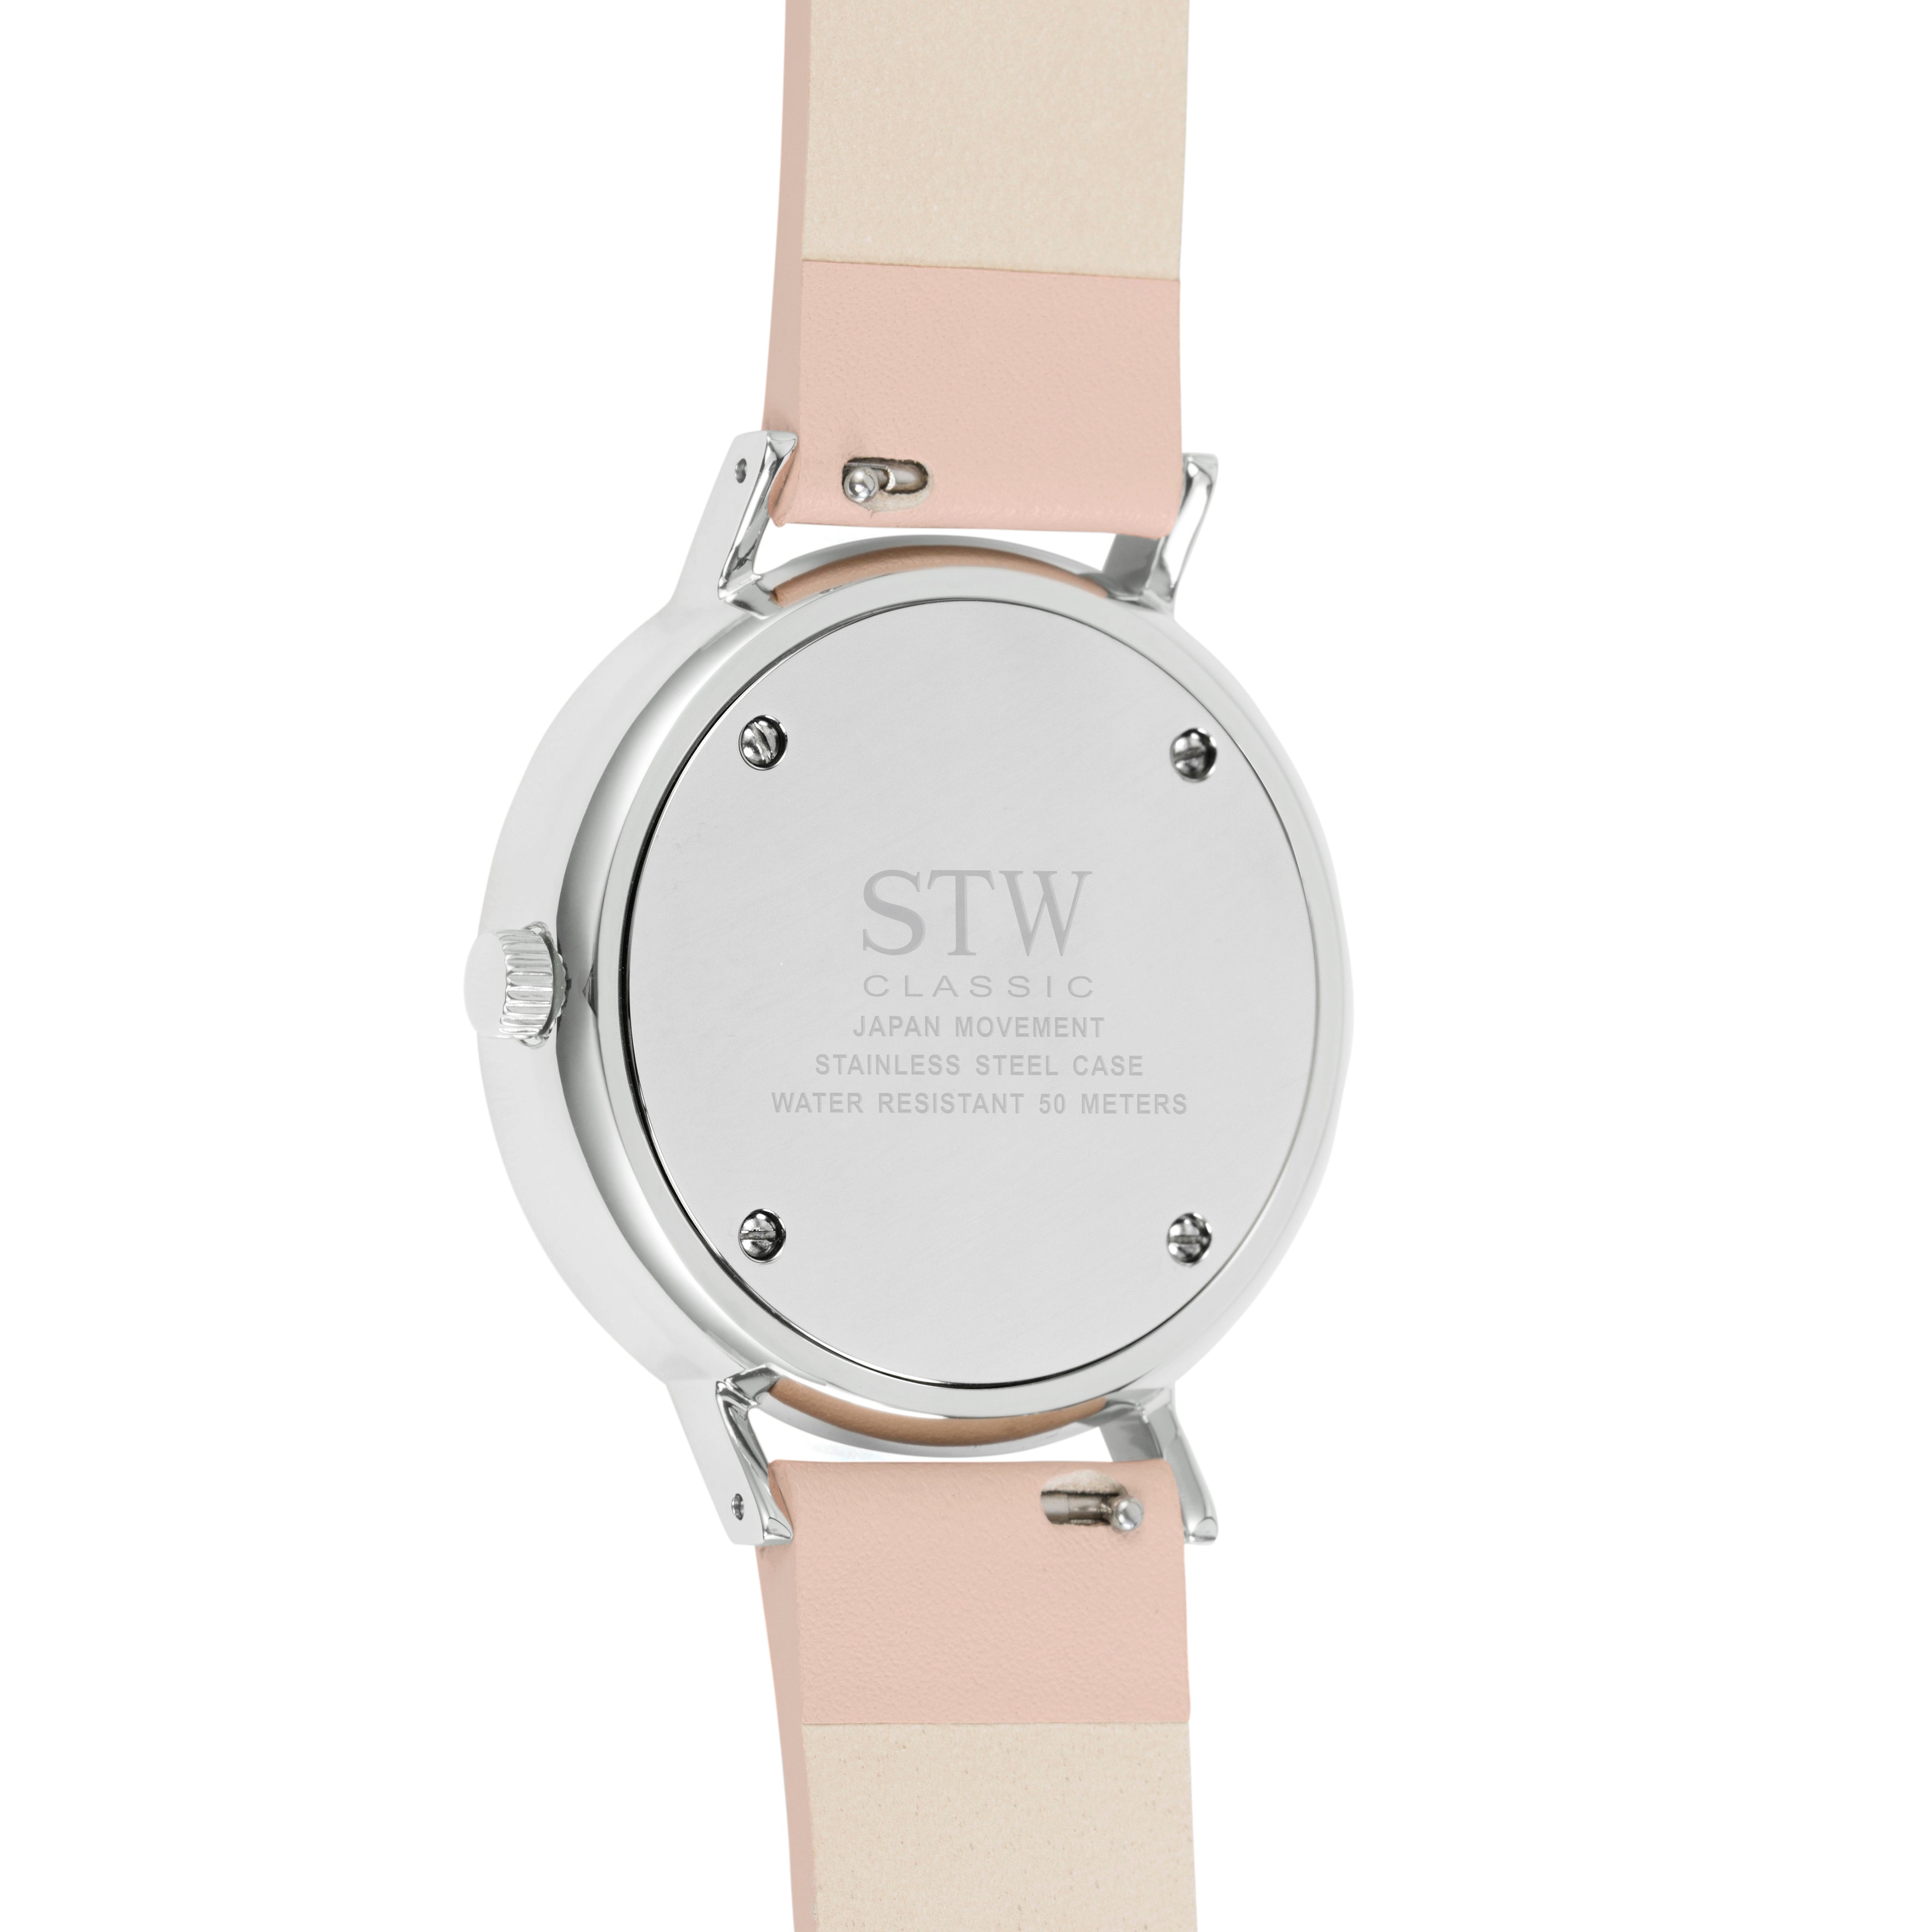 THE CLASSIC -  WHITE DIAL WITH VEGETABLE TAN LEATHER STRAP WATCH